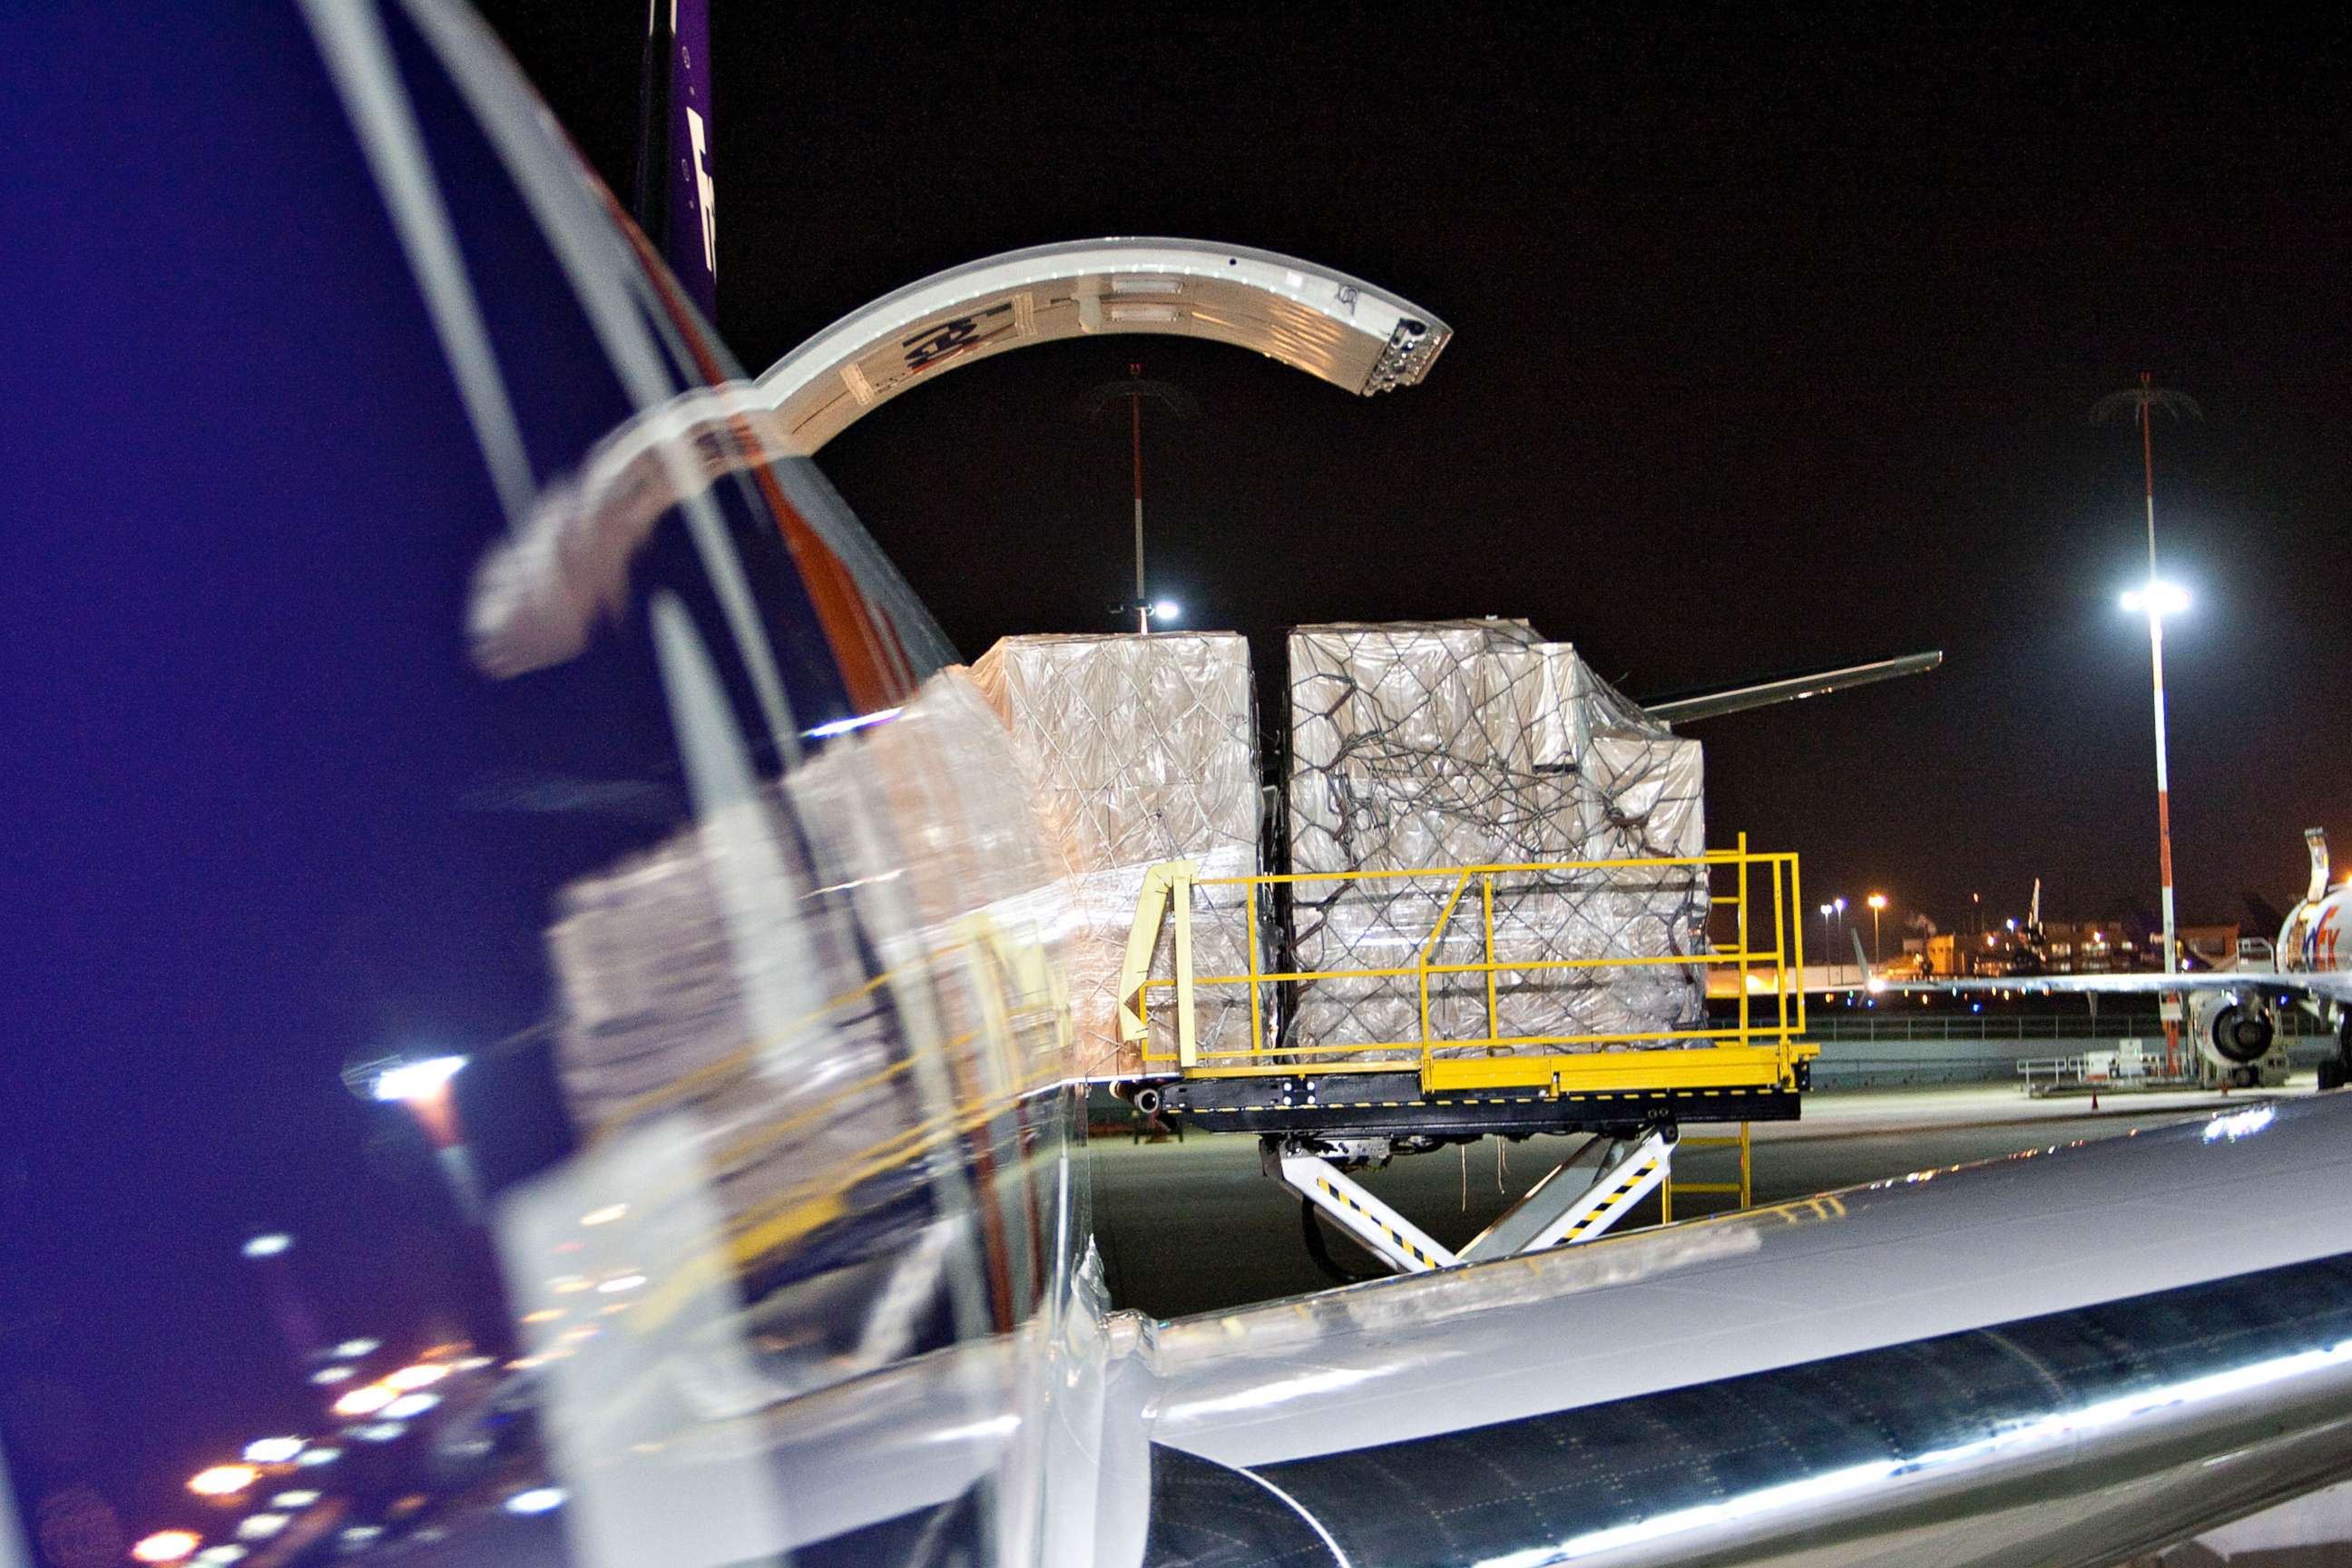 PHOTO: Cargo is unloaded from a FedEx Express Boeing 777-FS2 aircraft at the FedEx Express hub at Memphis International Airport in Memphis, Tennessee, U.S., on Friday, Dec. 11, 2009. 